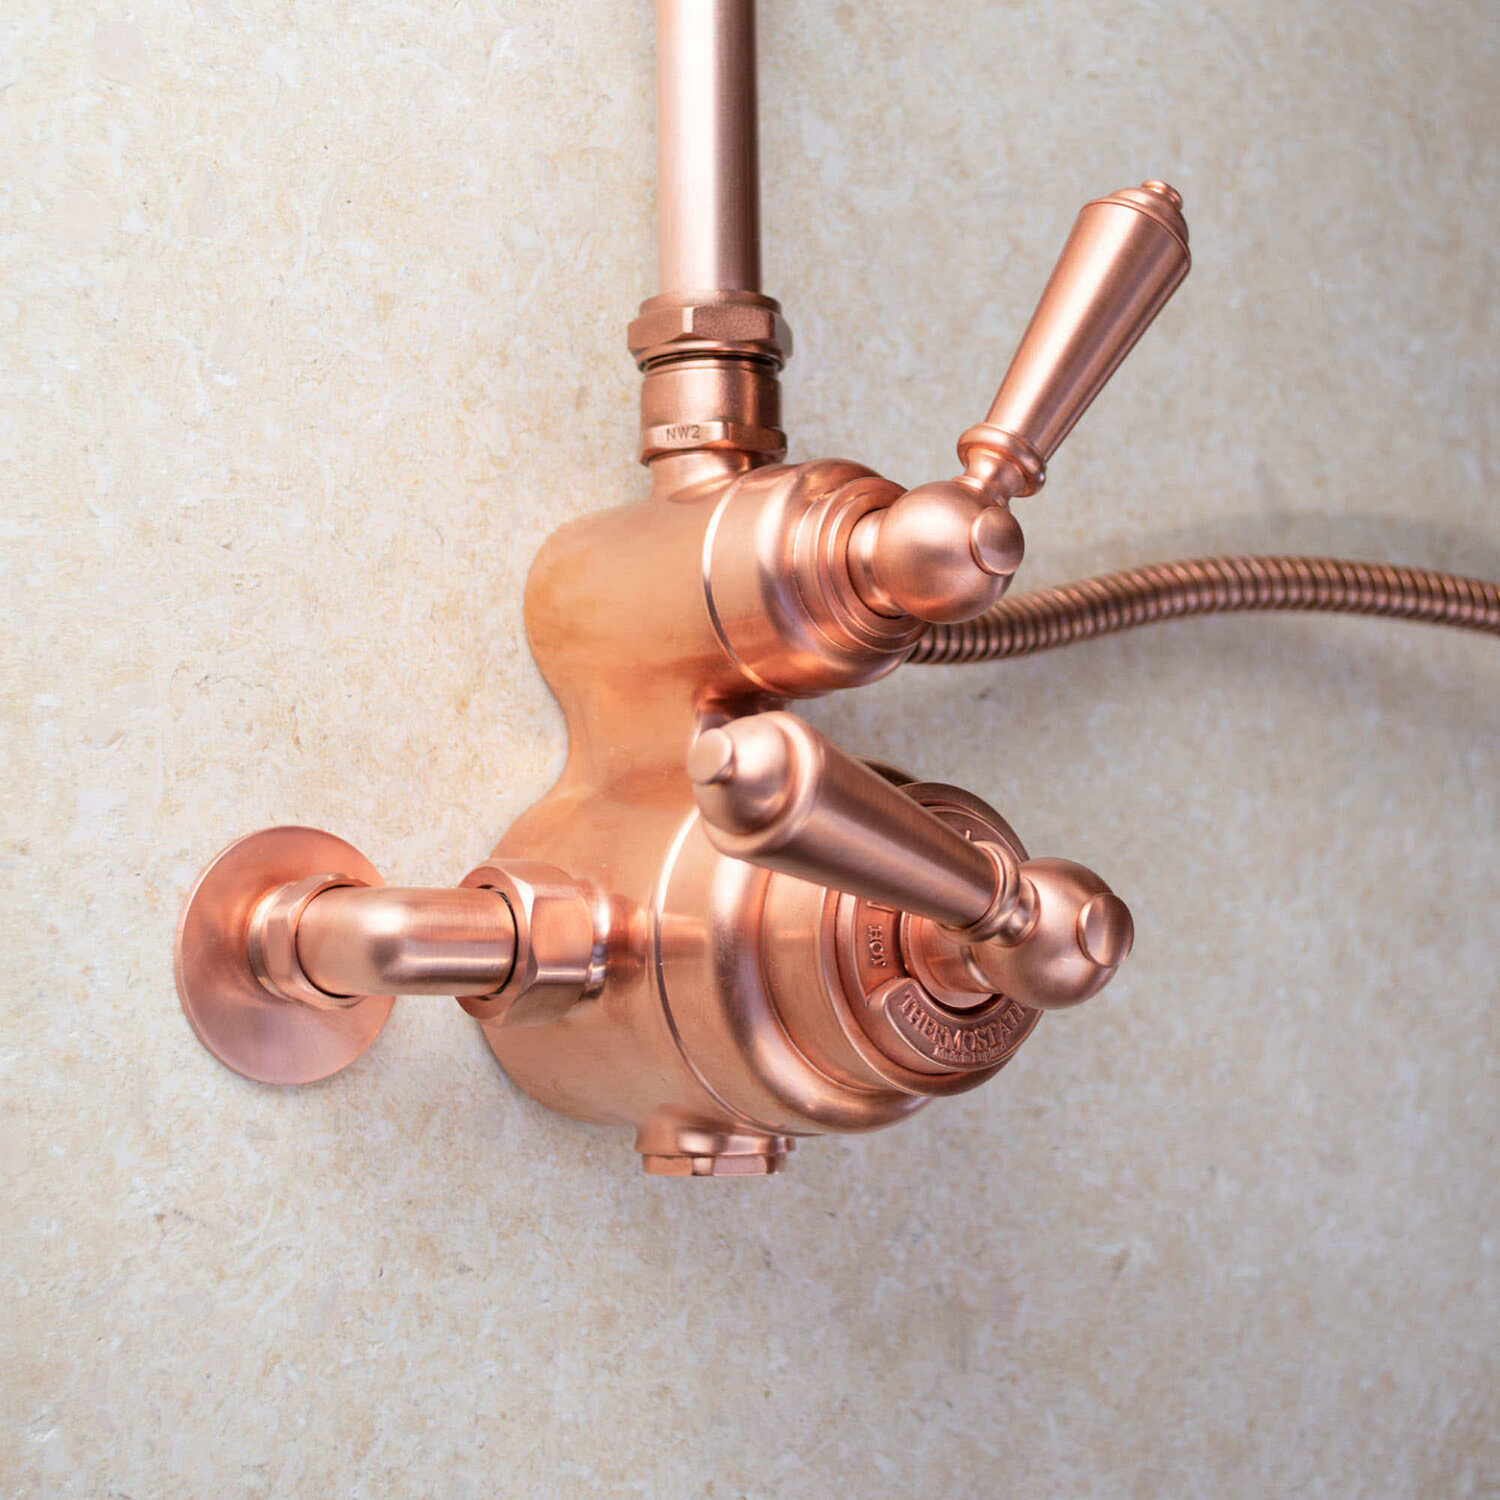 thermostatic copper showers on our online store or available in our Brighton bathroom showroom